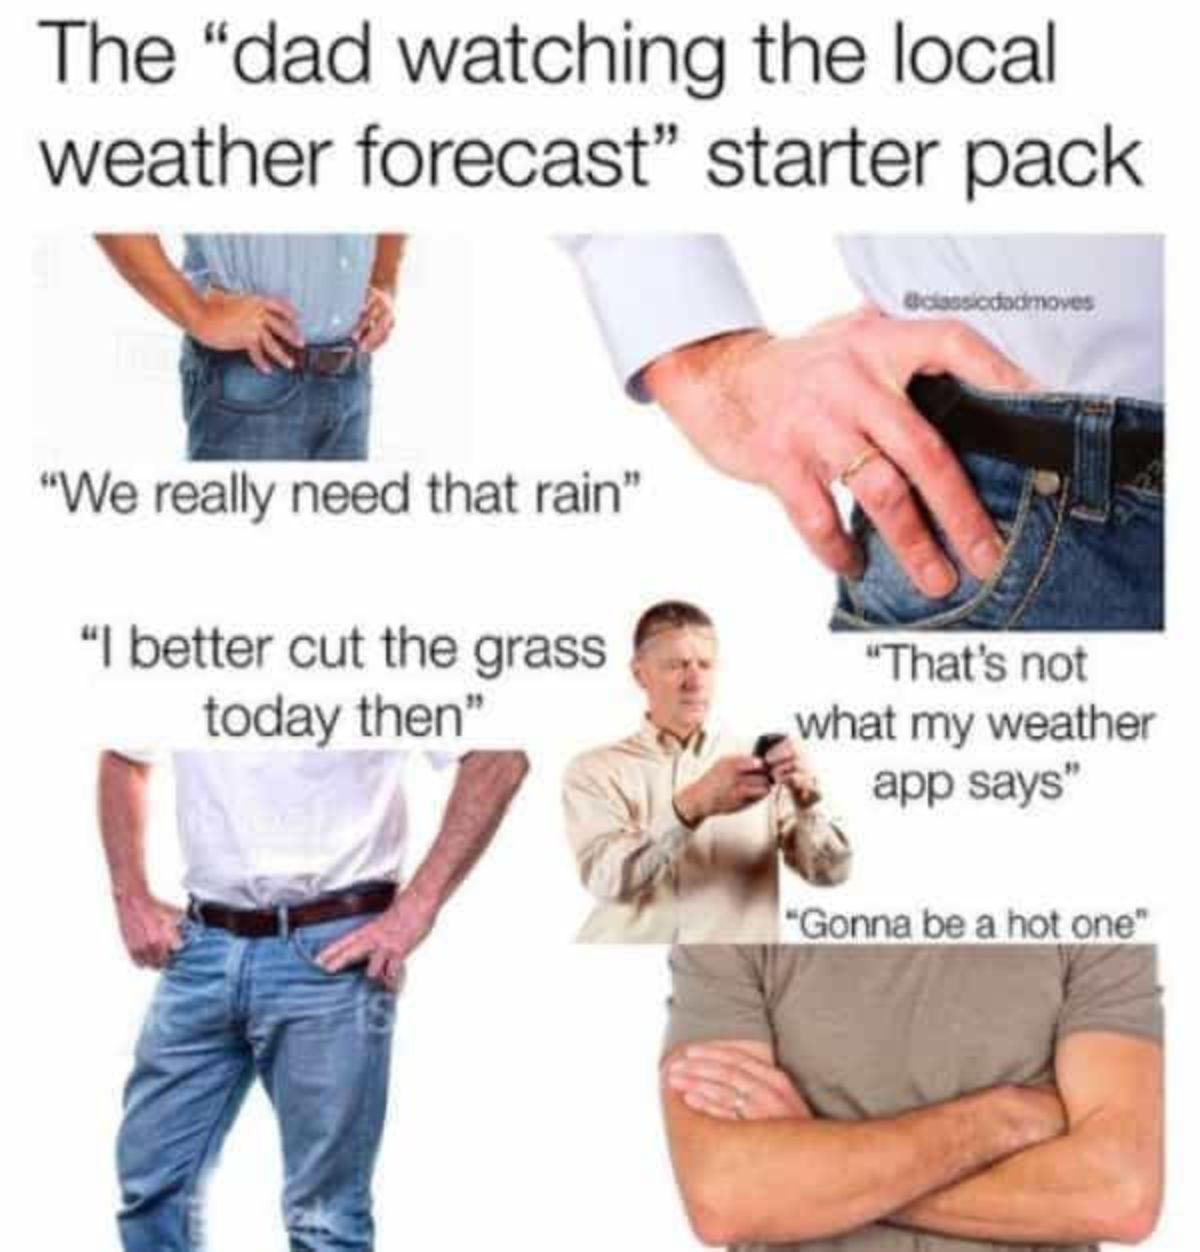 we really needed this rain - The "dad watching the local weather forecast" starter pack classicdadmoves "We really need that rain" "I better cut the grass today then" "That's not what my weather app says" "Gonna be a hot one"